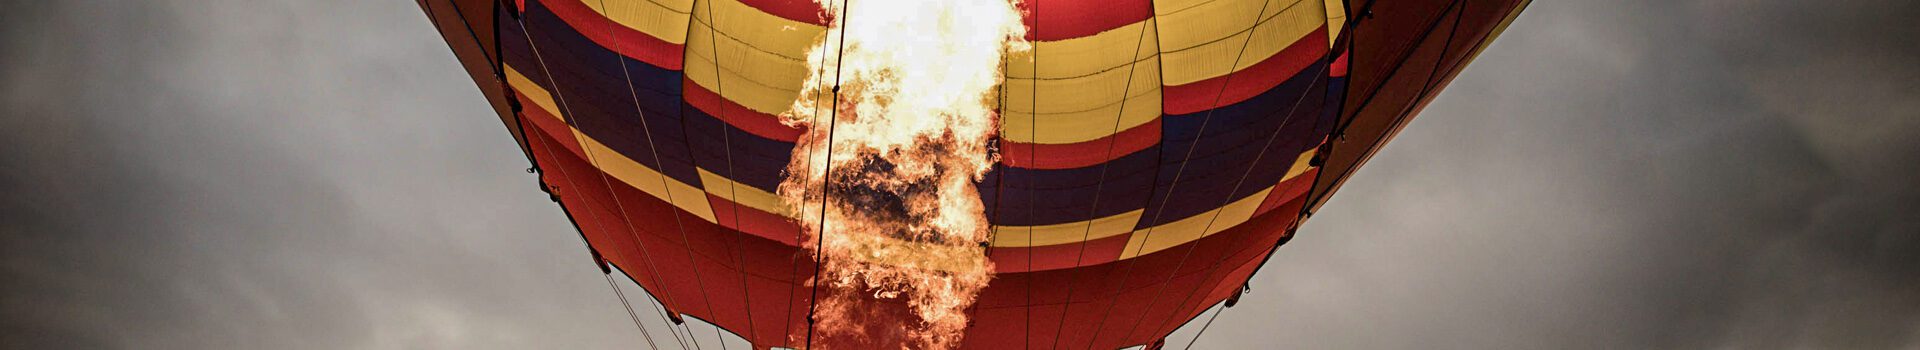 Hot air balloon with roaring flames